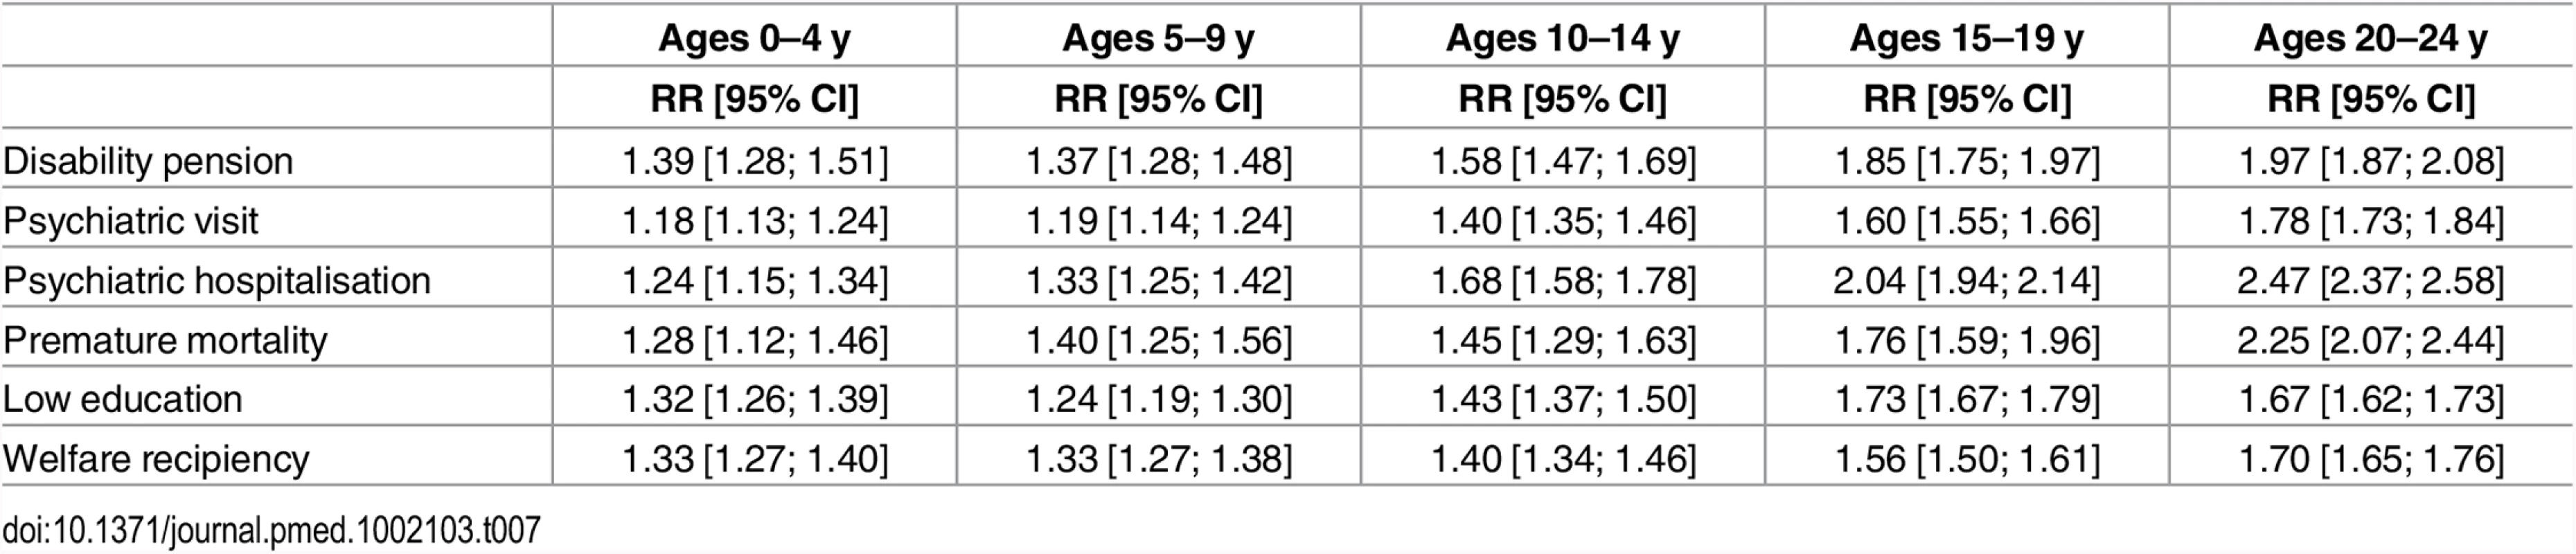 Relative risks (RR) and corresponding 95% confidence intervals (CIs) for the associations between TBI and poor functioning in adulthood, across age-band at first injury.